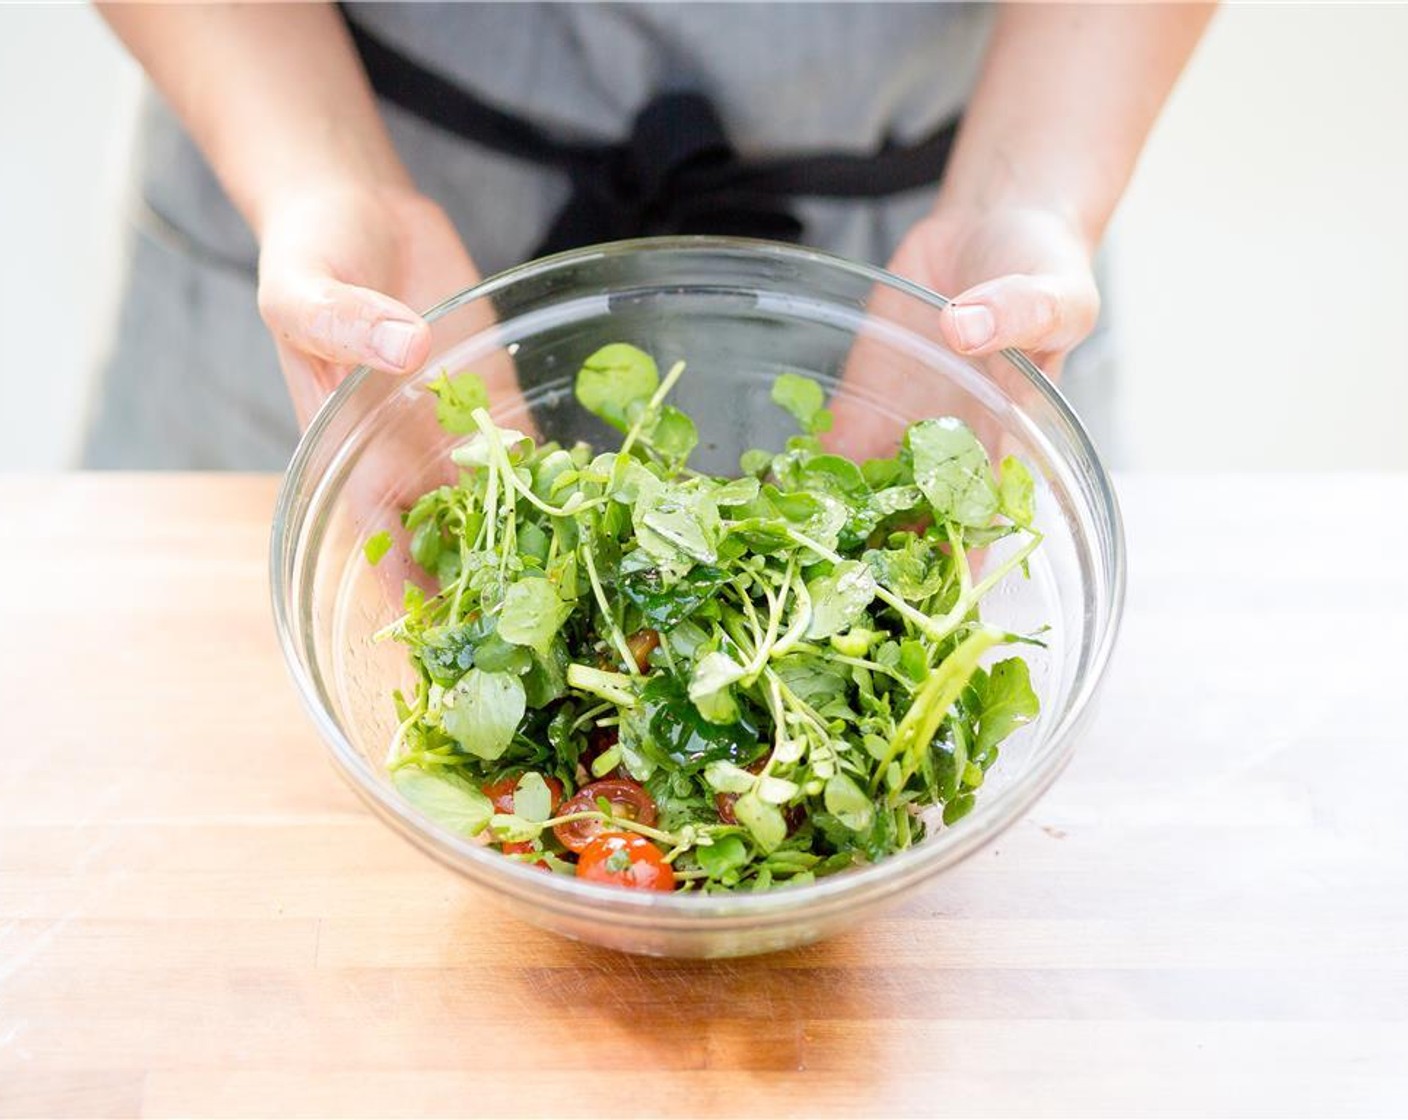 step 7 Remove two inches of the Watercress (1 bunch) stems and discard stems. Add to the bowl with the chilies, cilantro, and cherry tomatoes. Remove the marinade from the refrigerator and mix to combine. Add to the watercress salad.